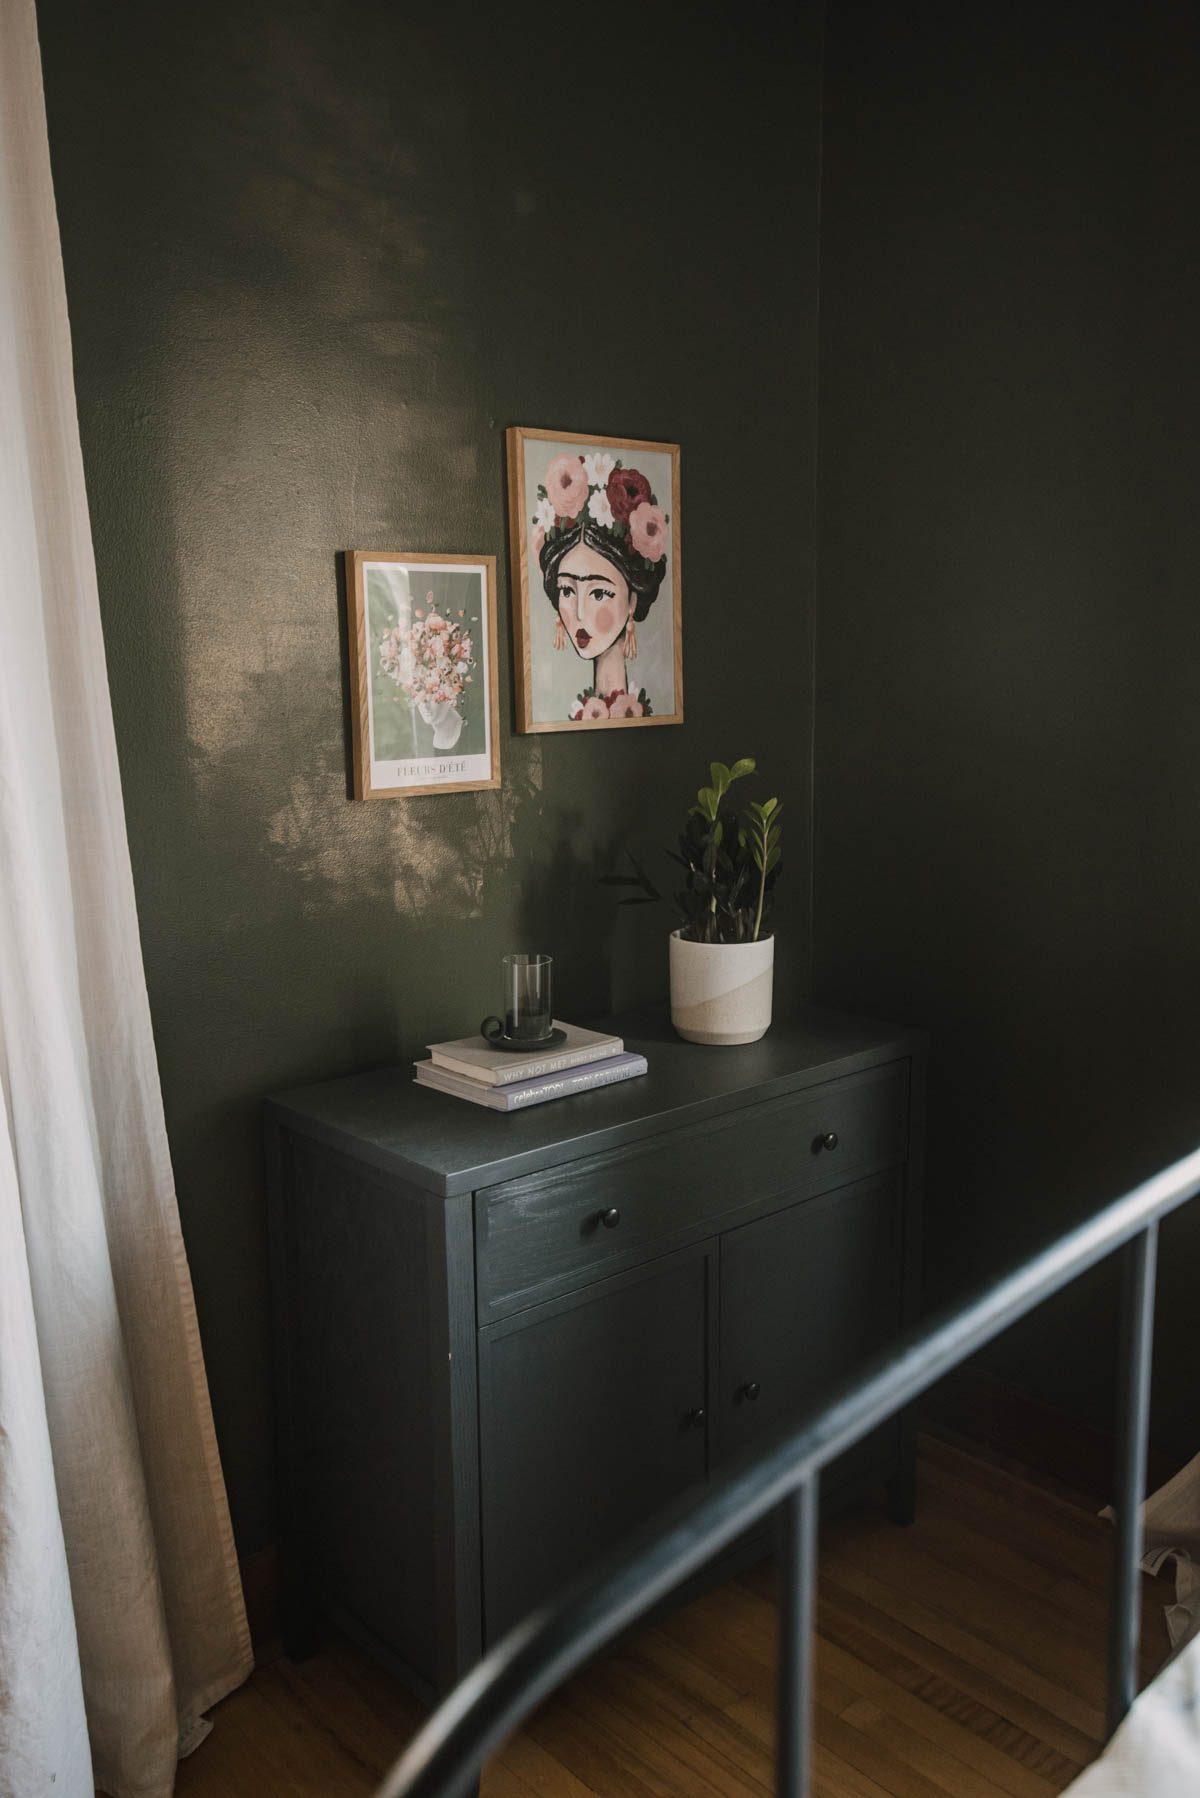 Dark green walls with floral prints